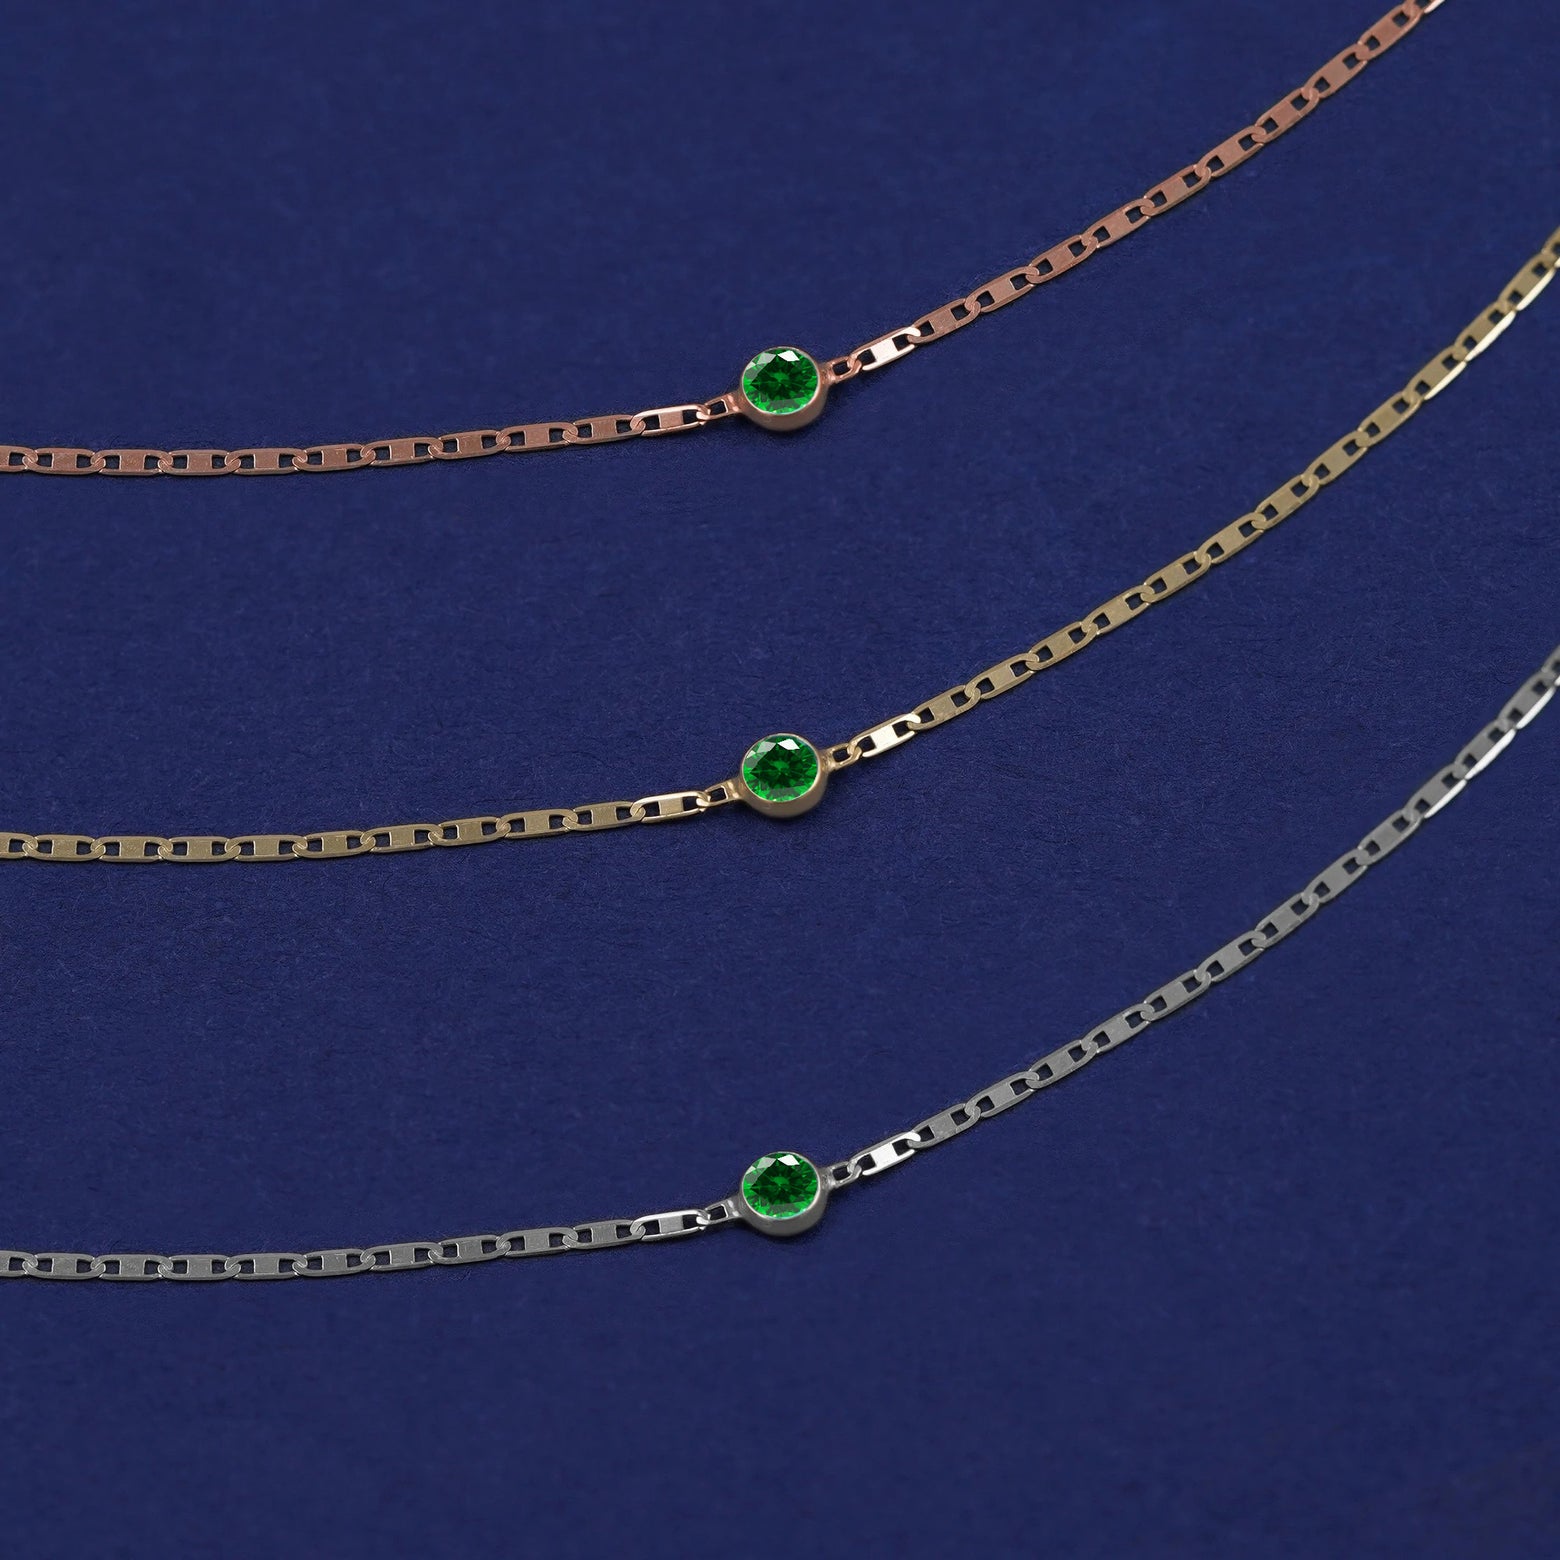 Three Emerald Bracelets shown in options of rose, yellow, and white gold